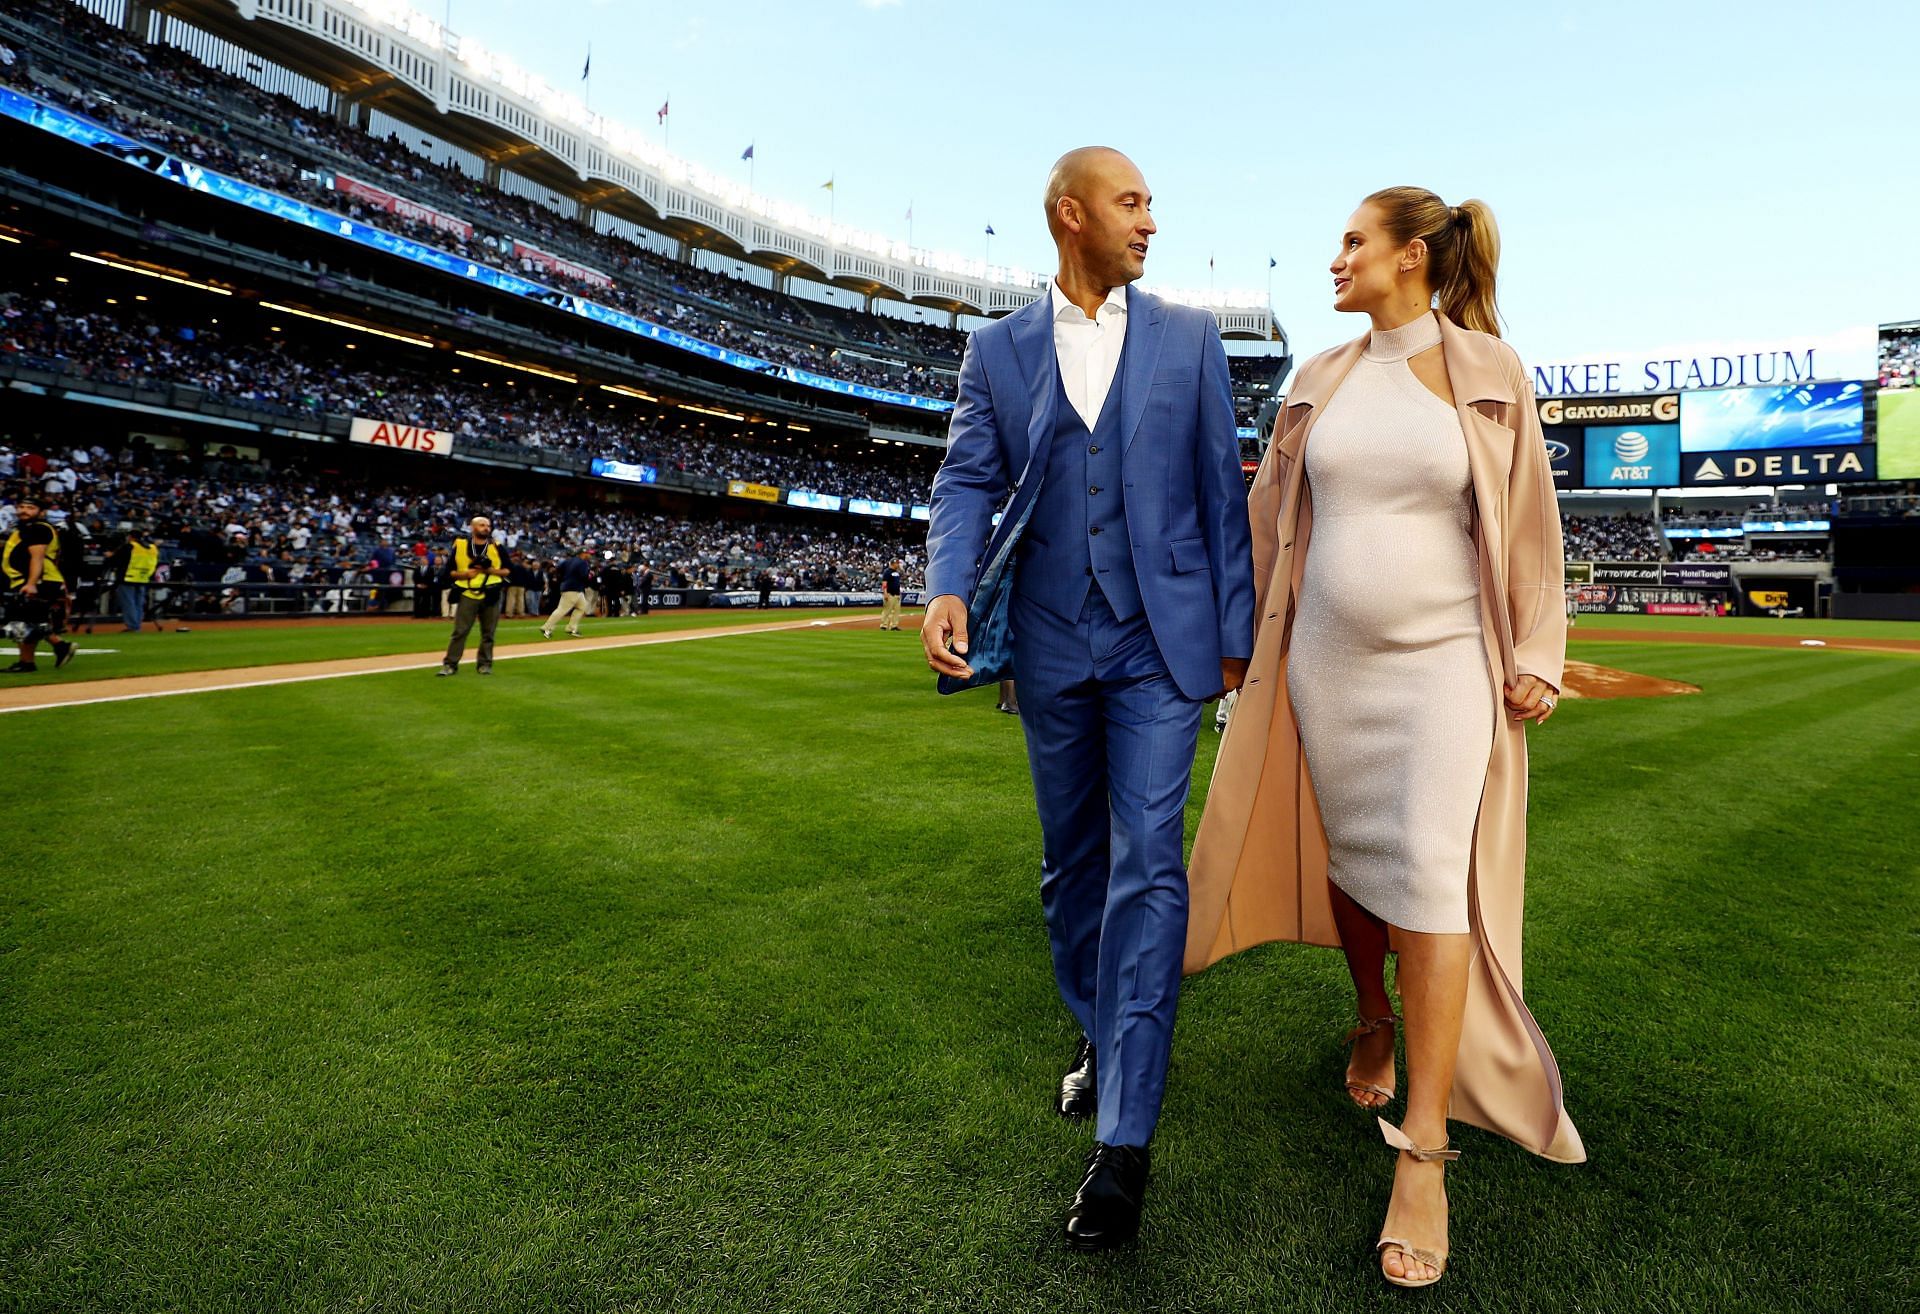 Derek Jeter and his Wife Hannah Davis walk off Power of social media. (Photo by Al Bello/Getty Images)